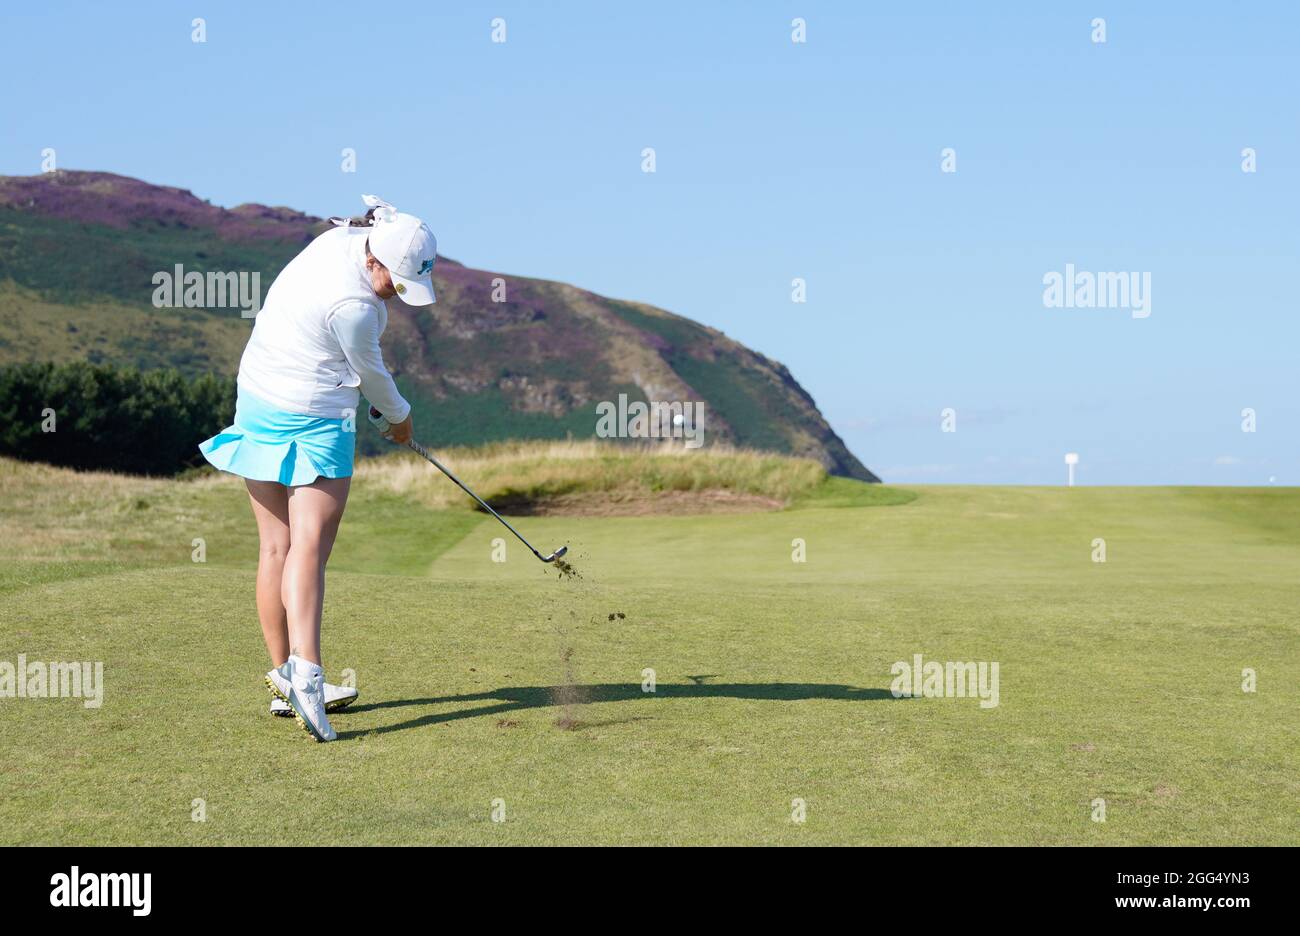 Team GB&I's Charlotte Heath plays her second shot the the second green during the 2021 Curtis Cup Day 3 - Singles at Conwy Golf Club, Conwy, Wales on Stock Photo